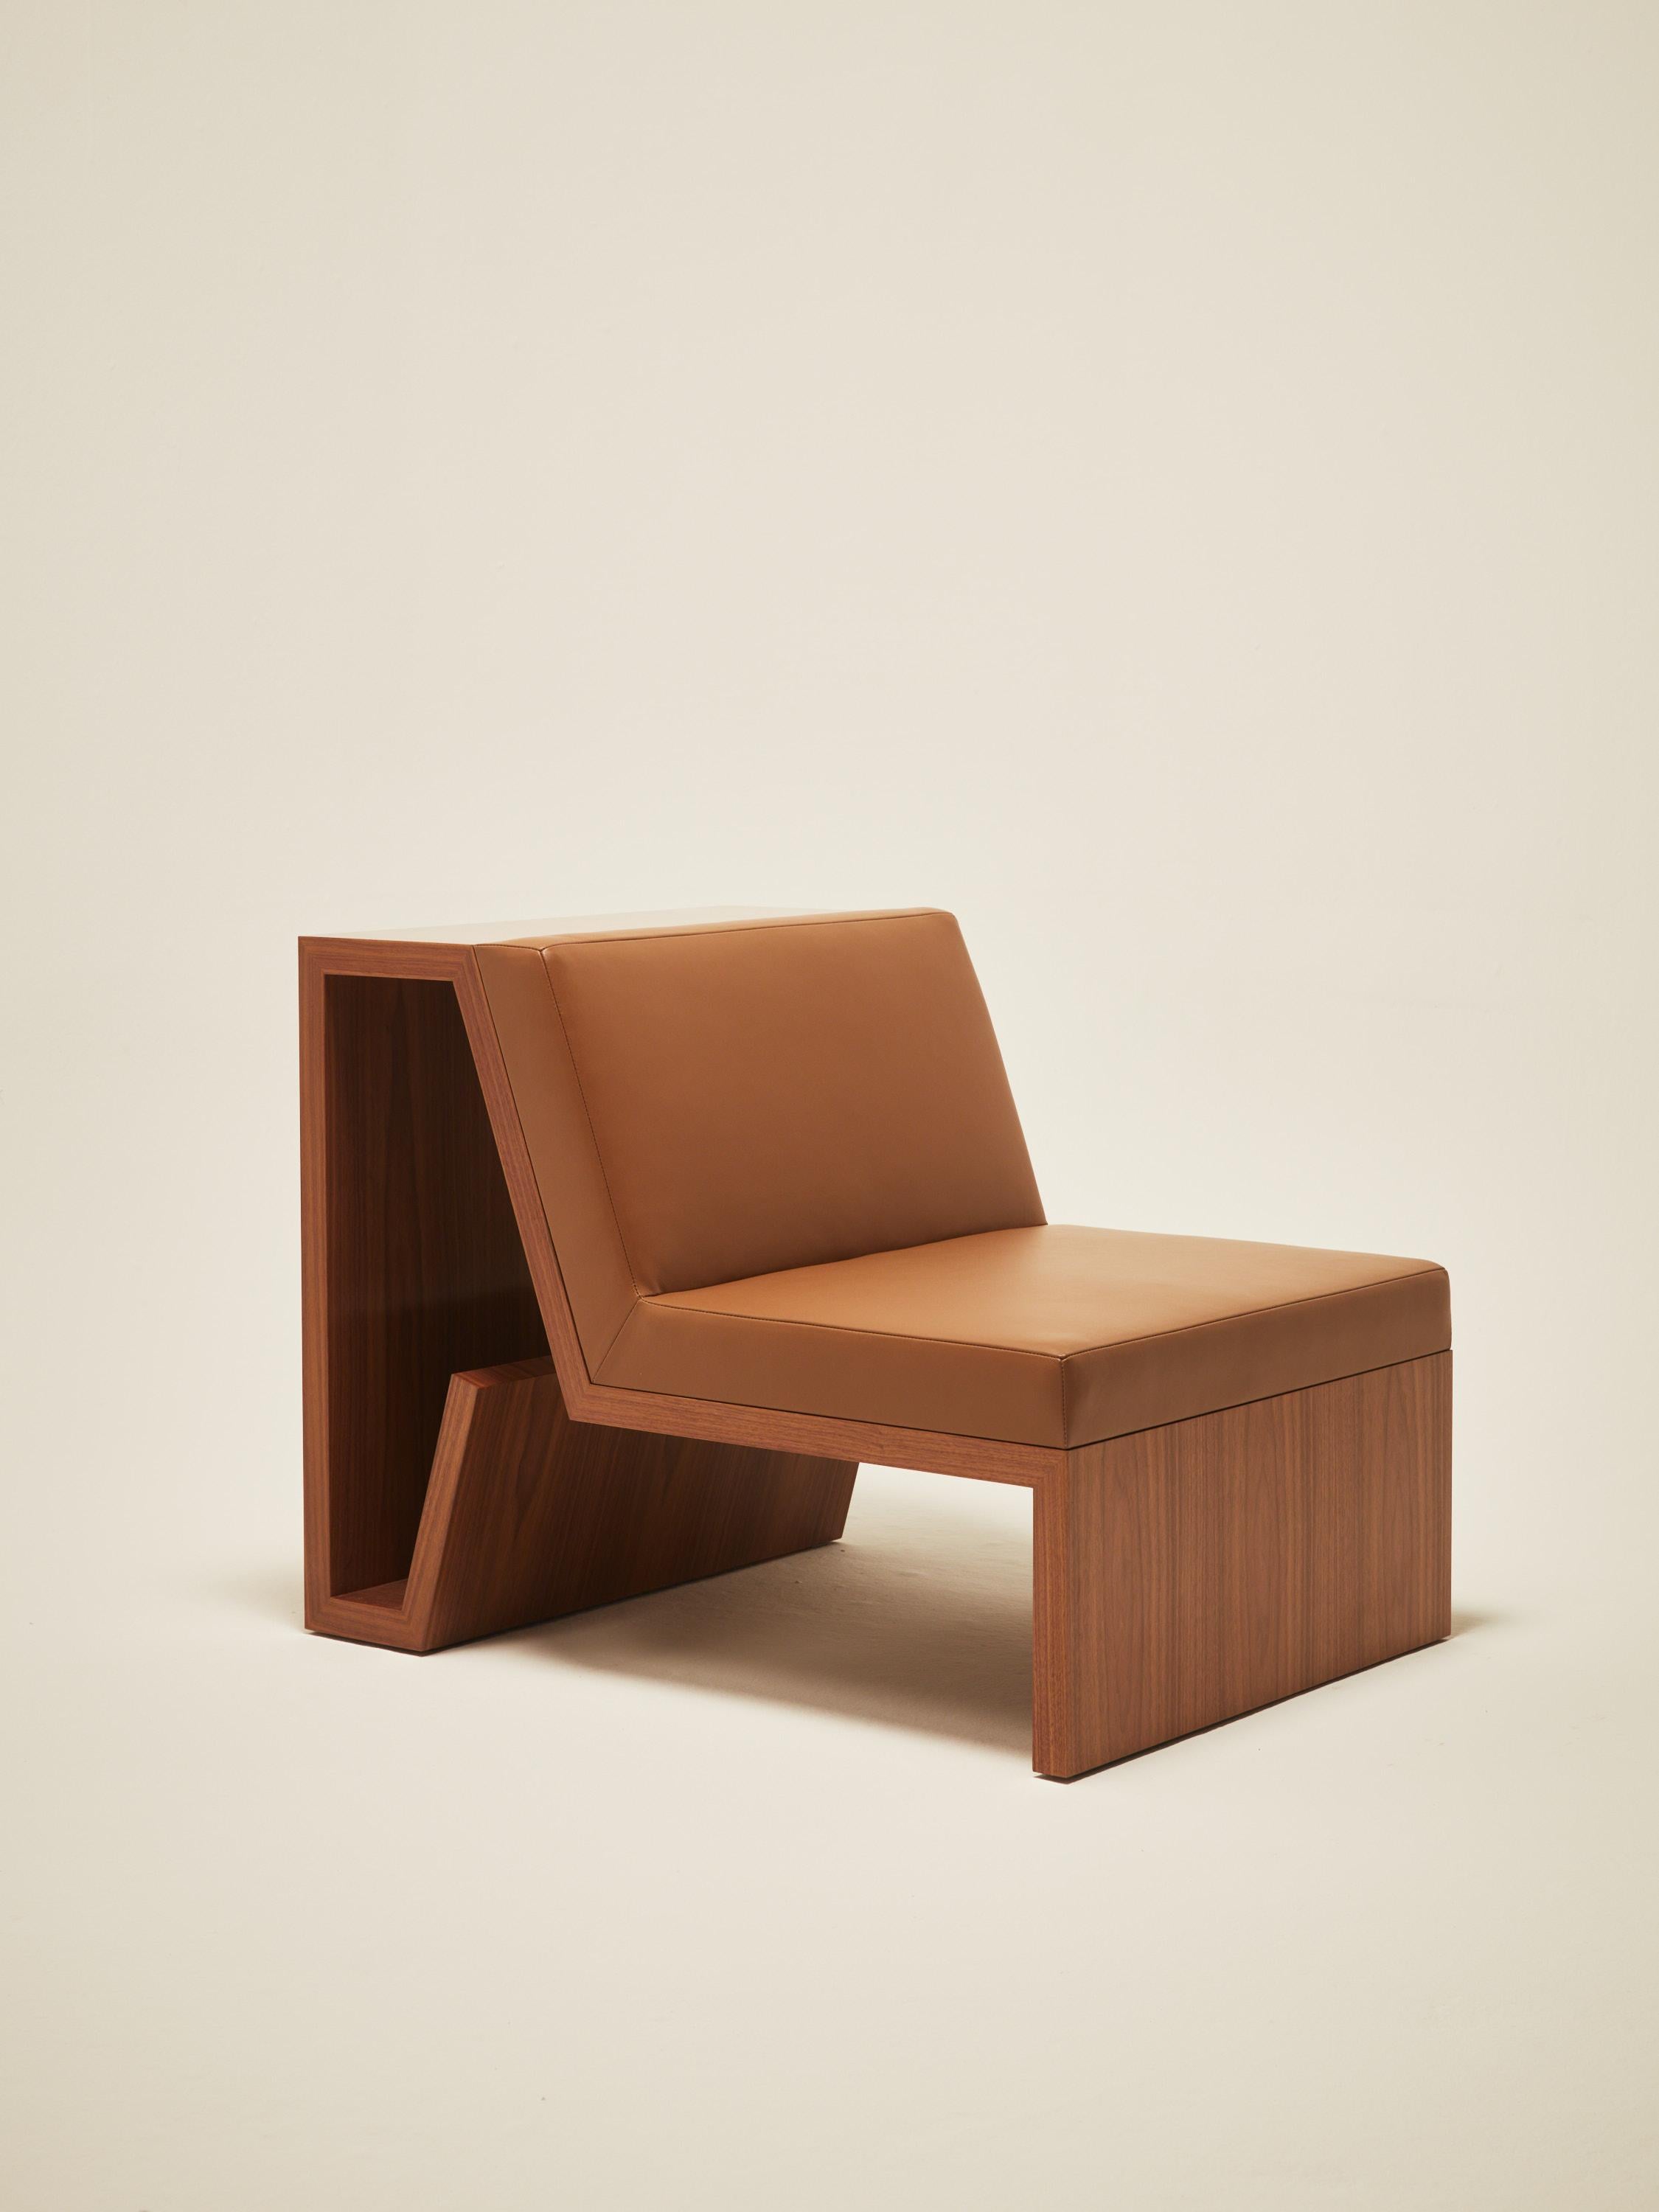 American Continuous Chair - Hand applied wood veneer & leather upholstery For Sale